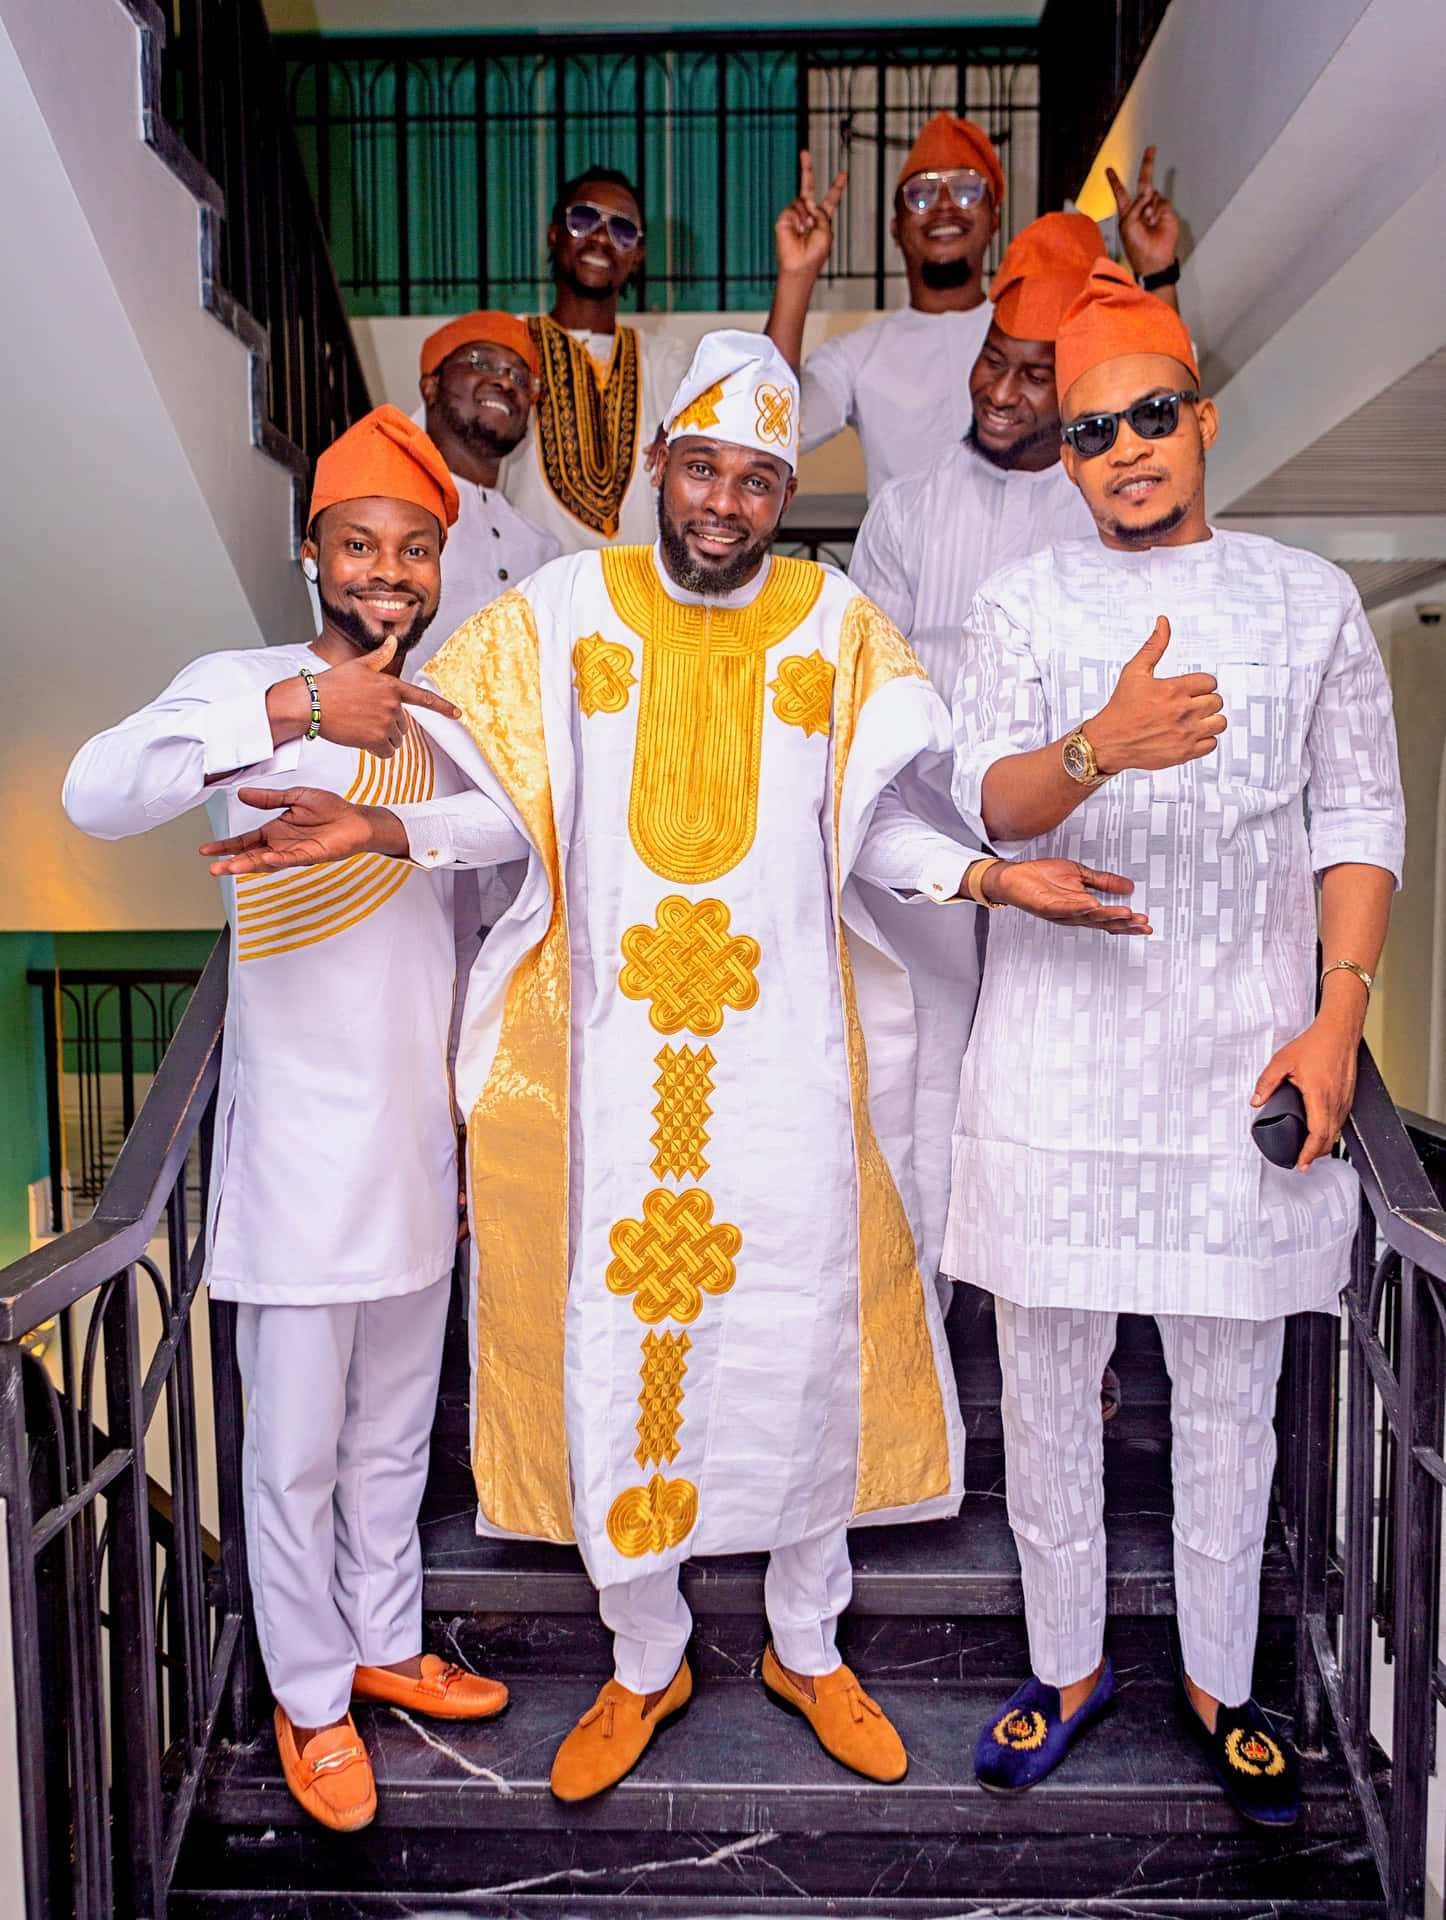 A Group Of Men In Traditional Attire Posing For A Picture